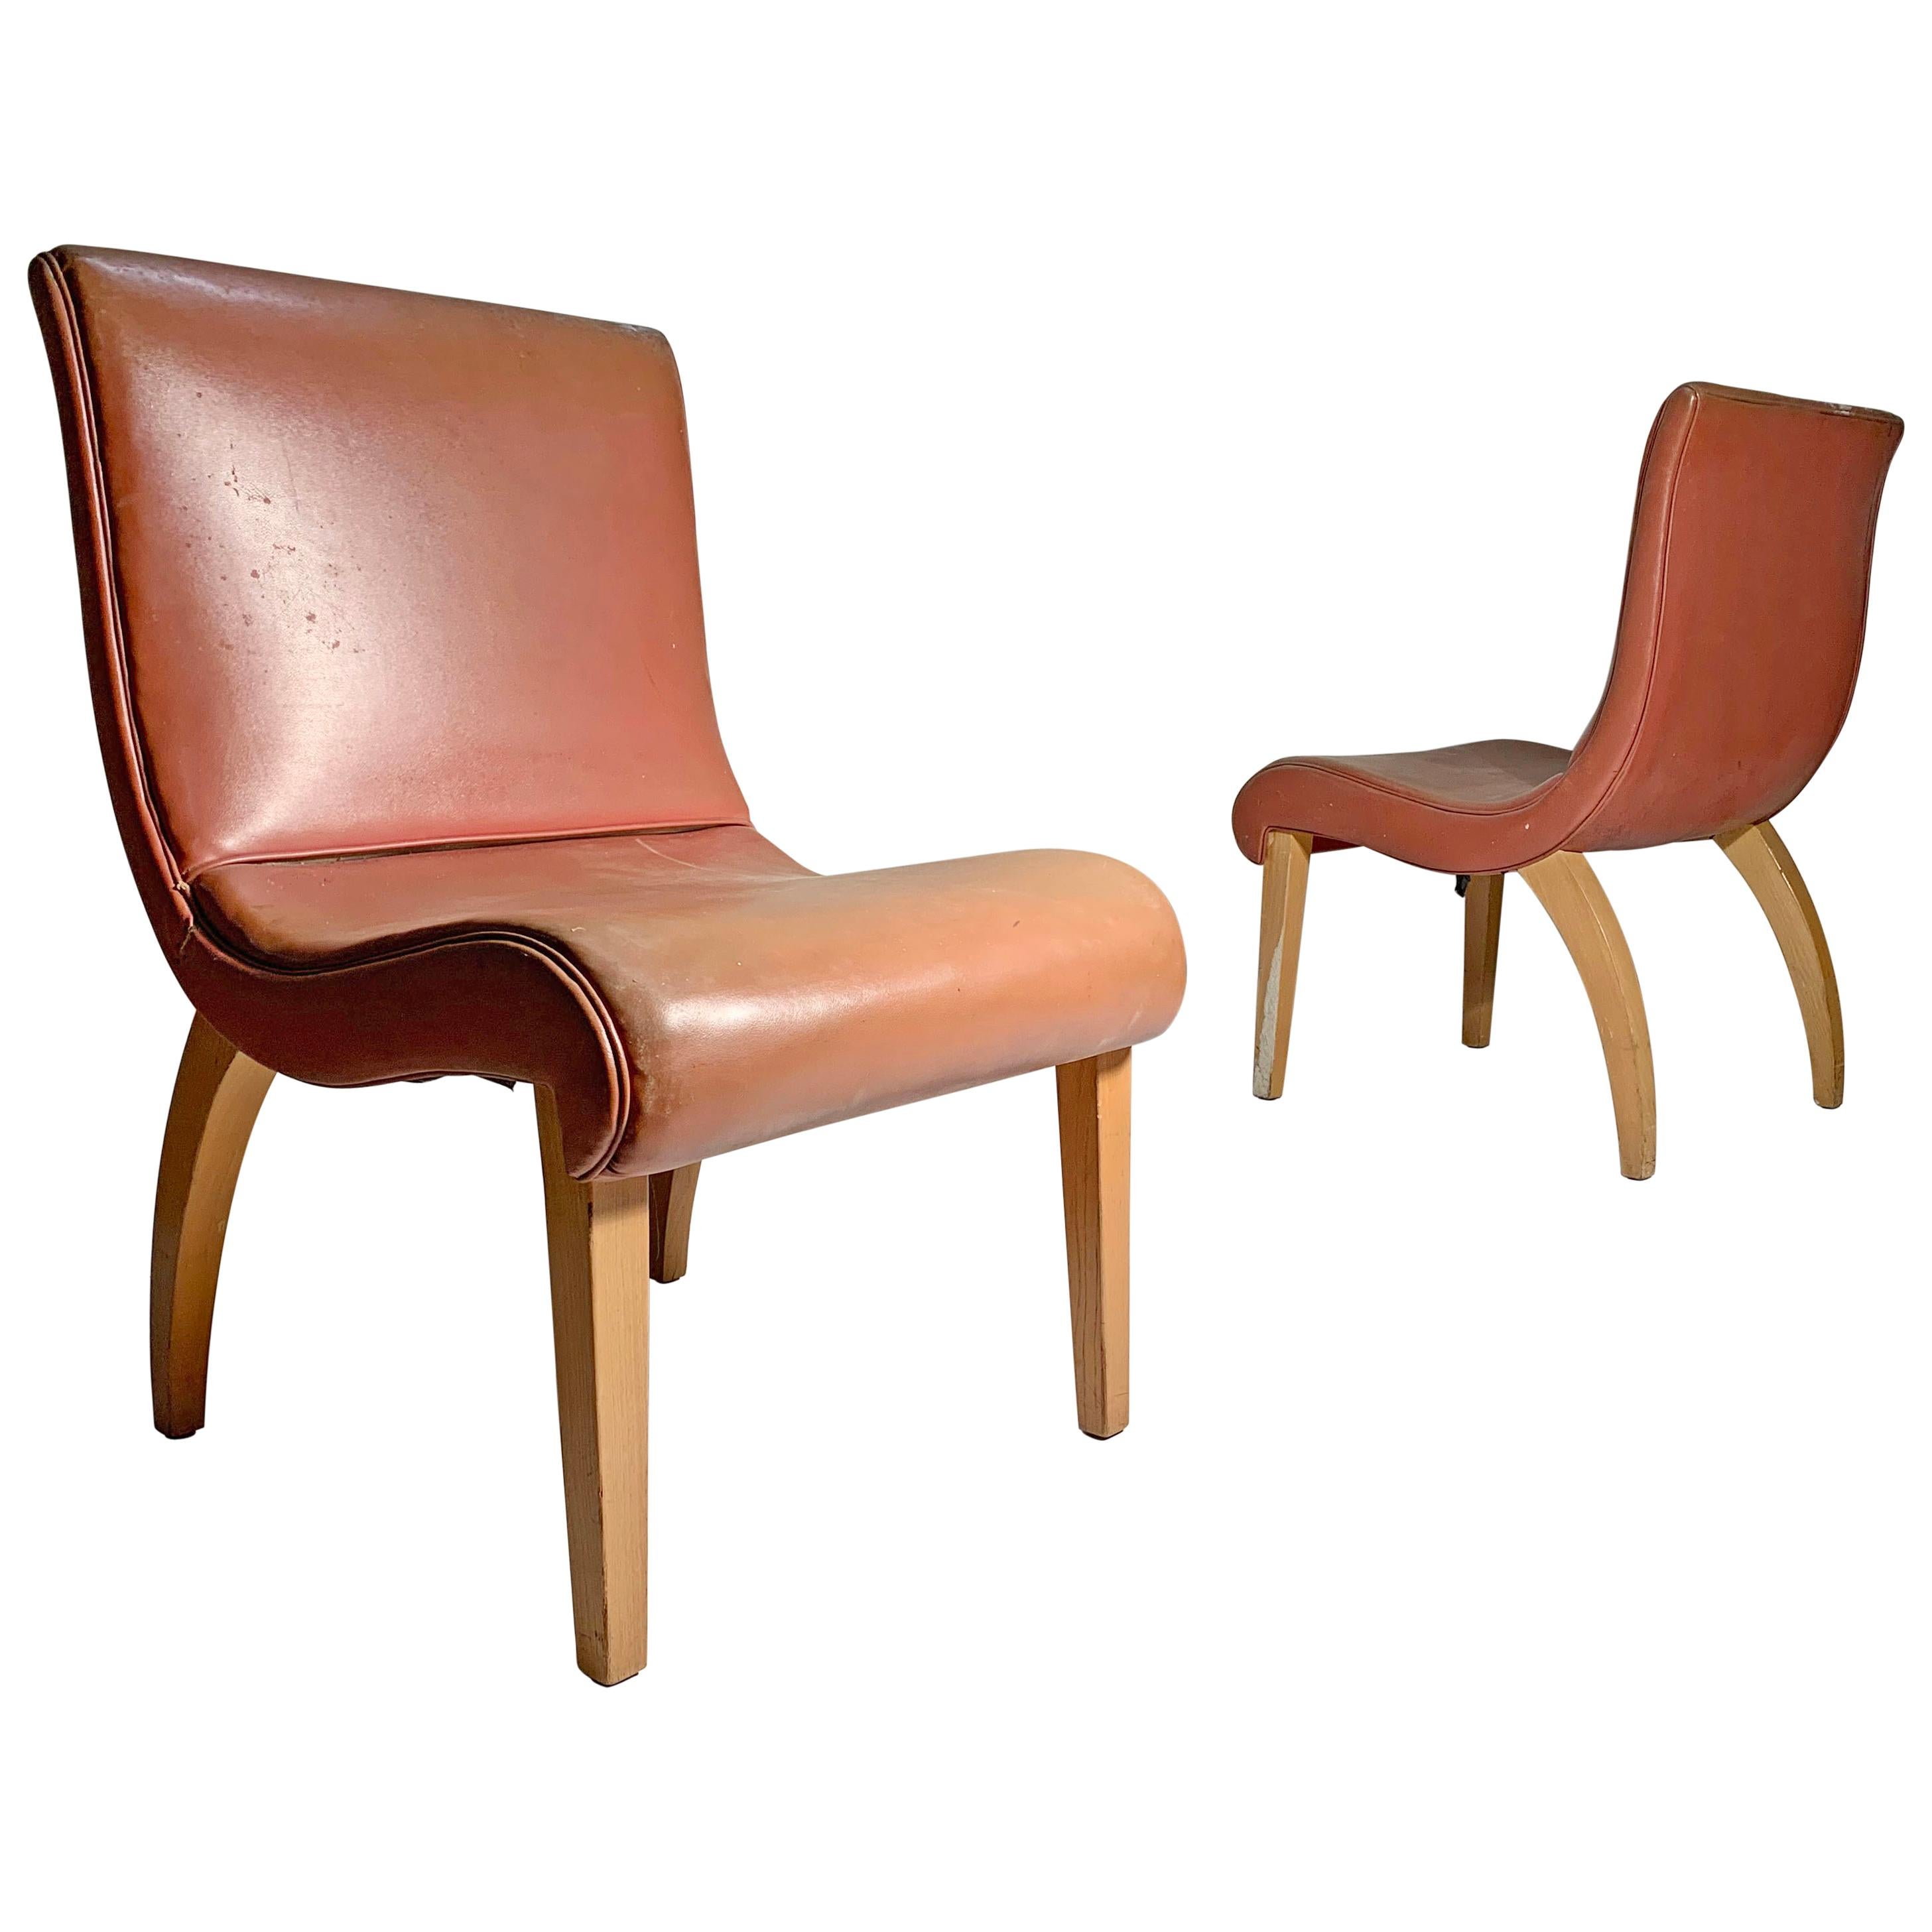 Pair of 1940s Lounge or Side Chairs Attributed to Gilbert Rohde For Sale